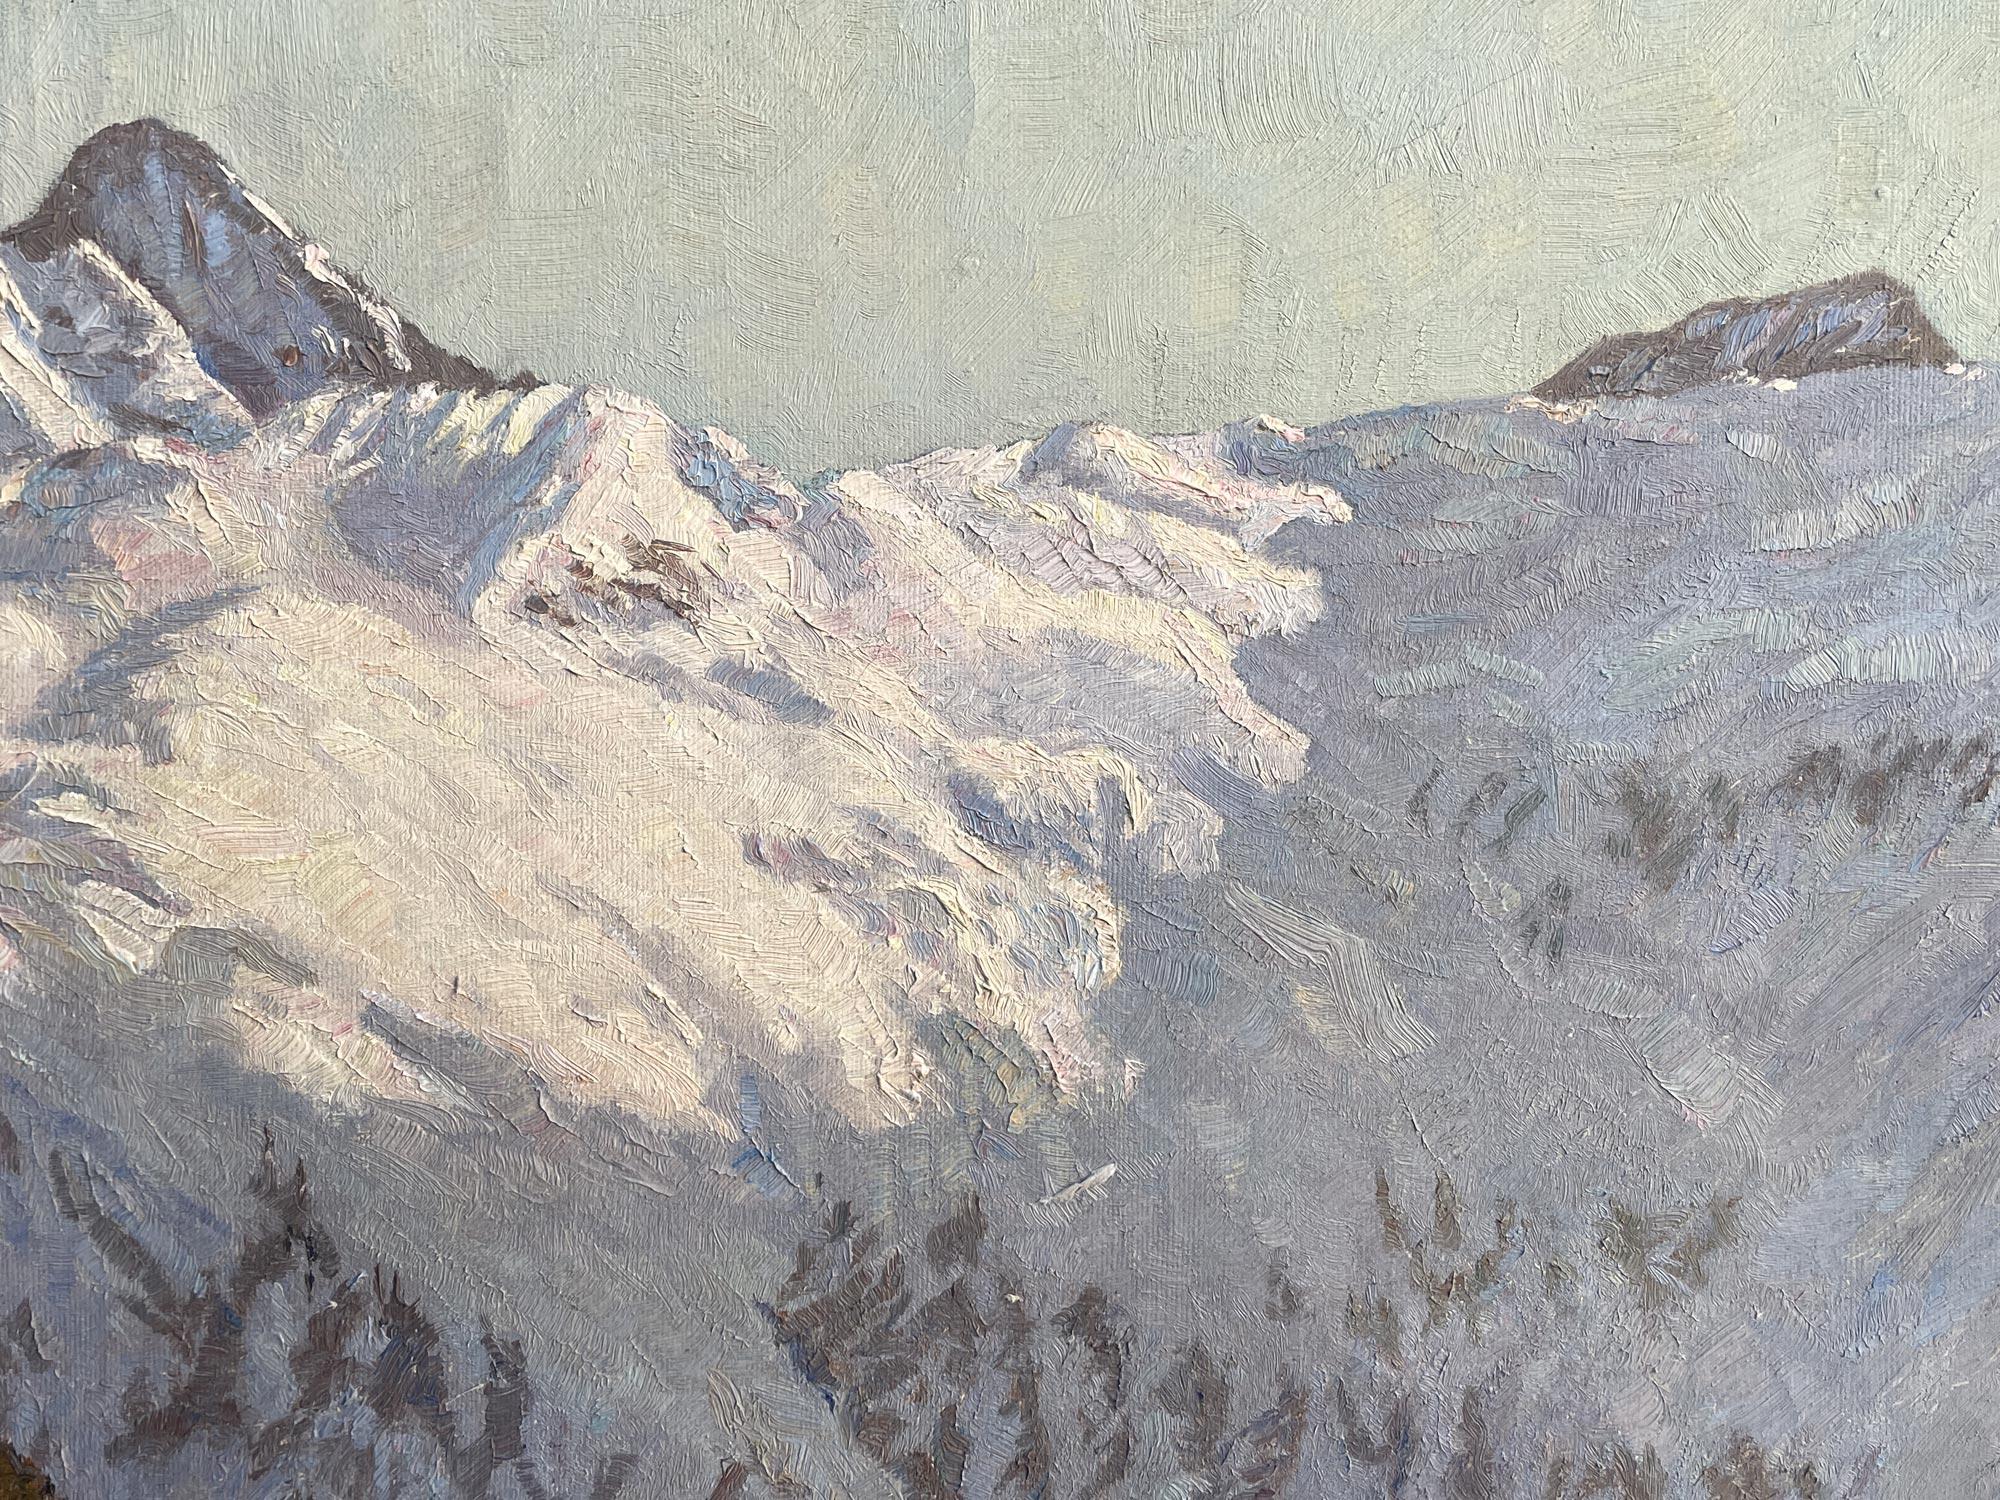 Italian Snowy Landscape Oil On Canvas by Alex Weise - Dolomites 1930 For Sale